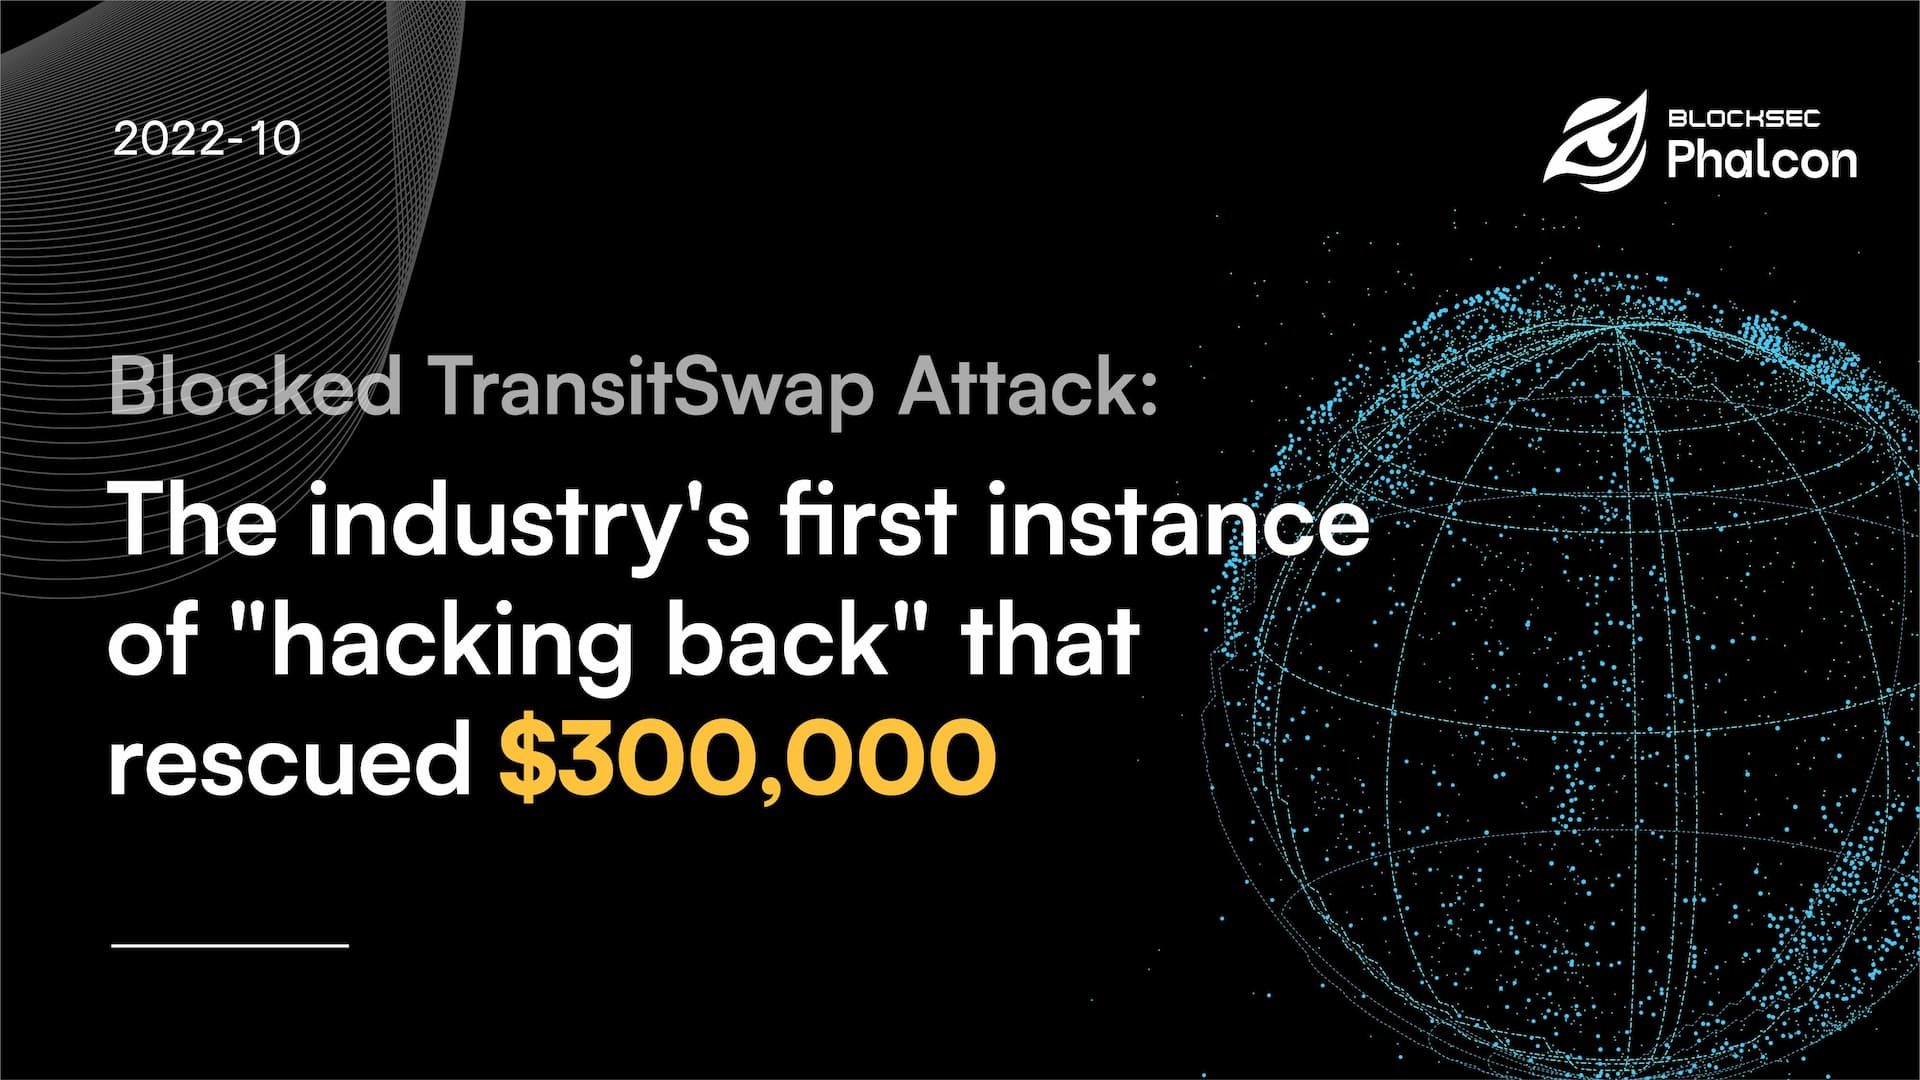 Blocked TransitSwap Attack: Industry's First "Hacking Back" to Rescue $300,000